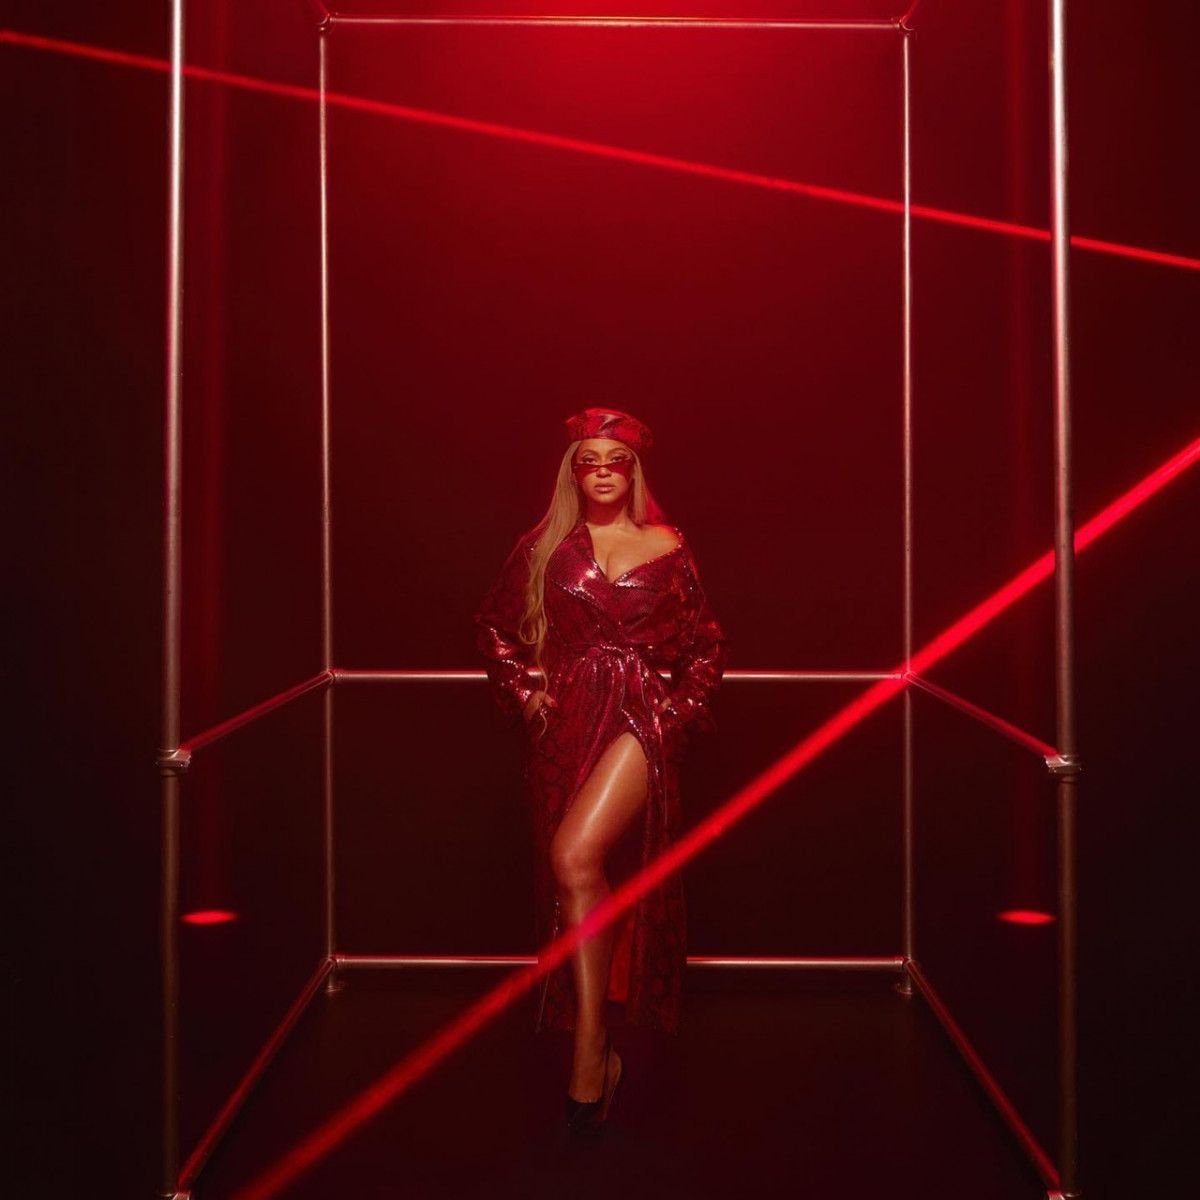 Beyoncé in a red dress standing in a red-lit room - Beyonce